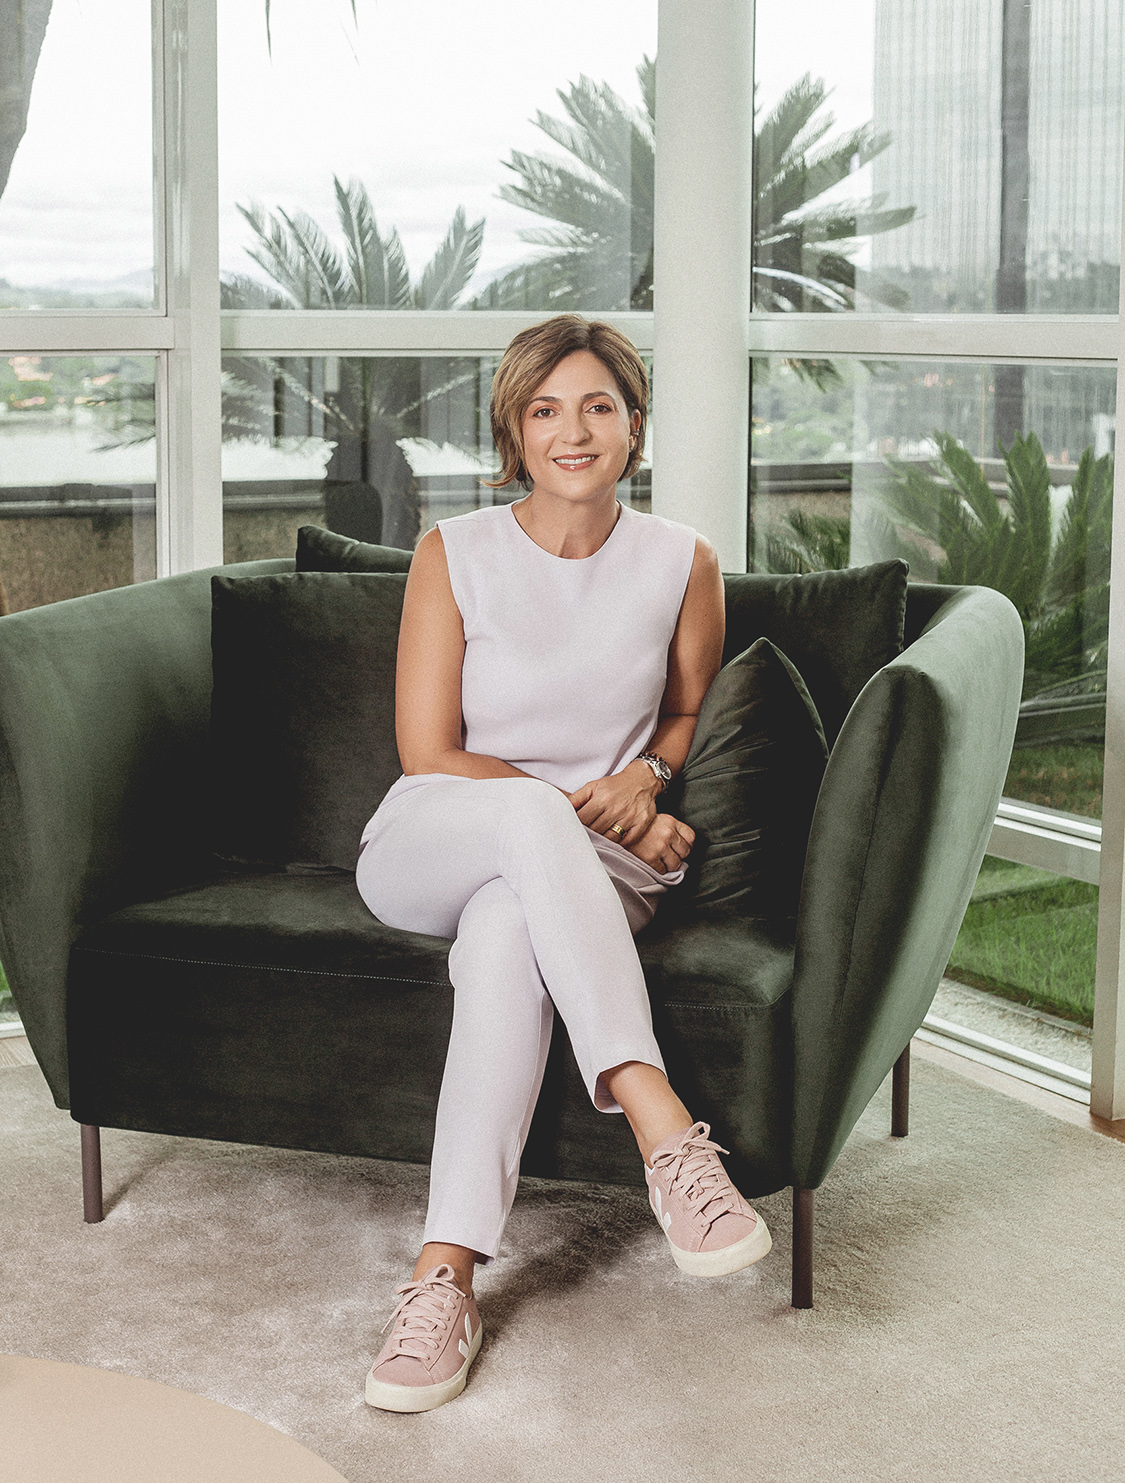 Following senior leadership roles at Big Tech companies including Apple, Google, and Microsoft, Paula Bellizia joined EBANX as its new president of Global Payments in February 2022.